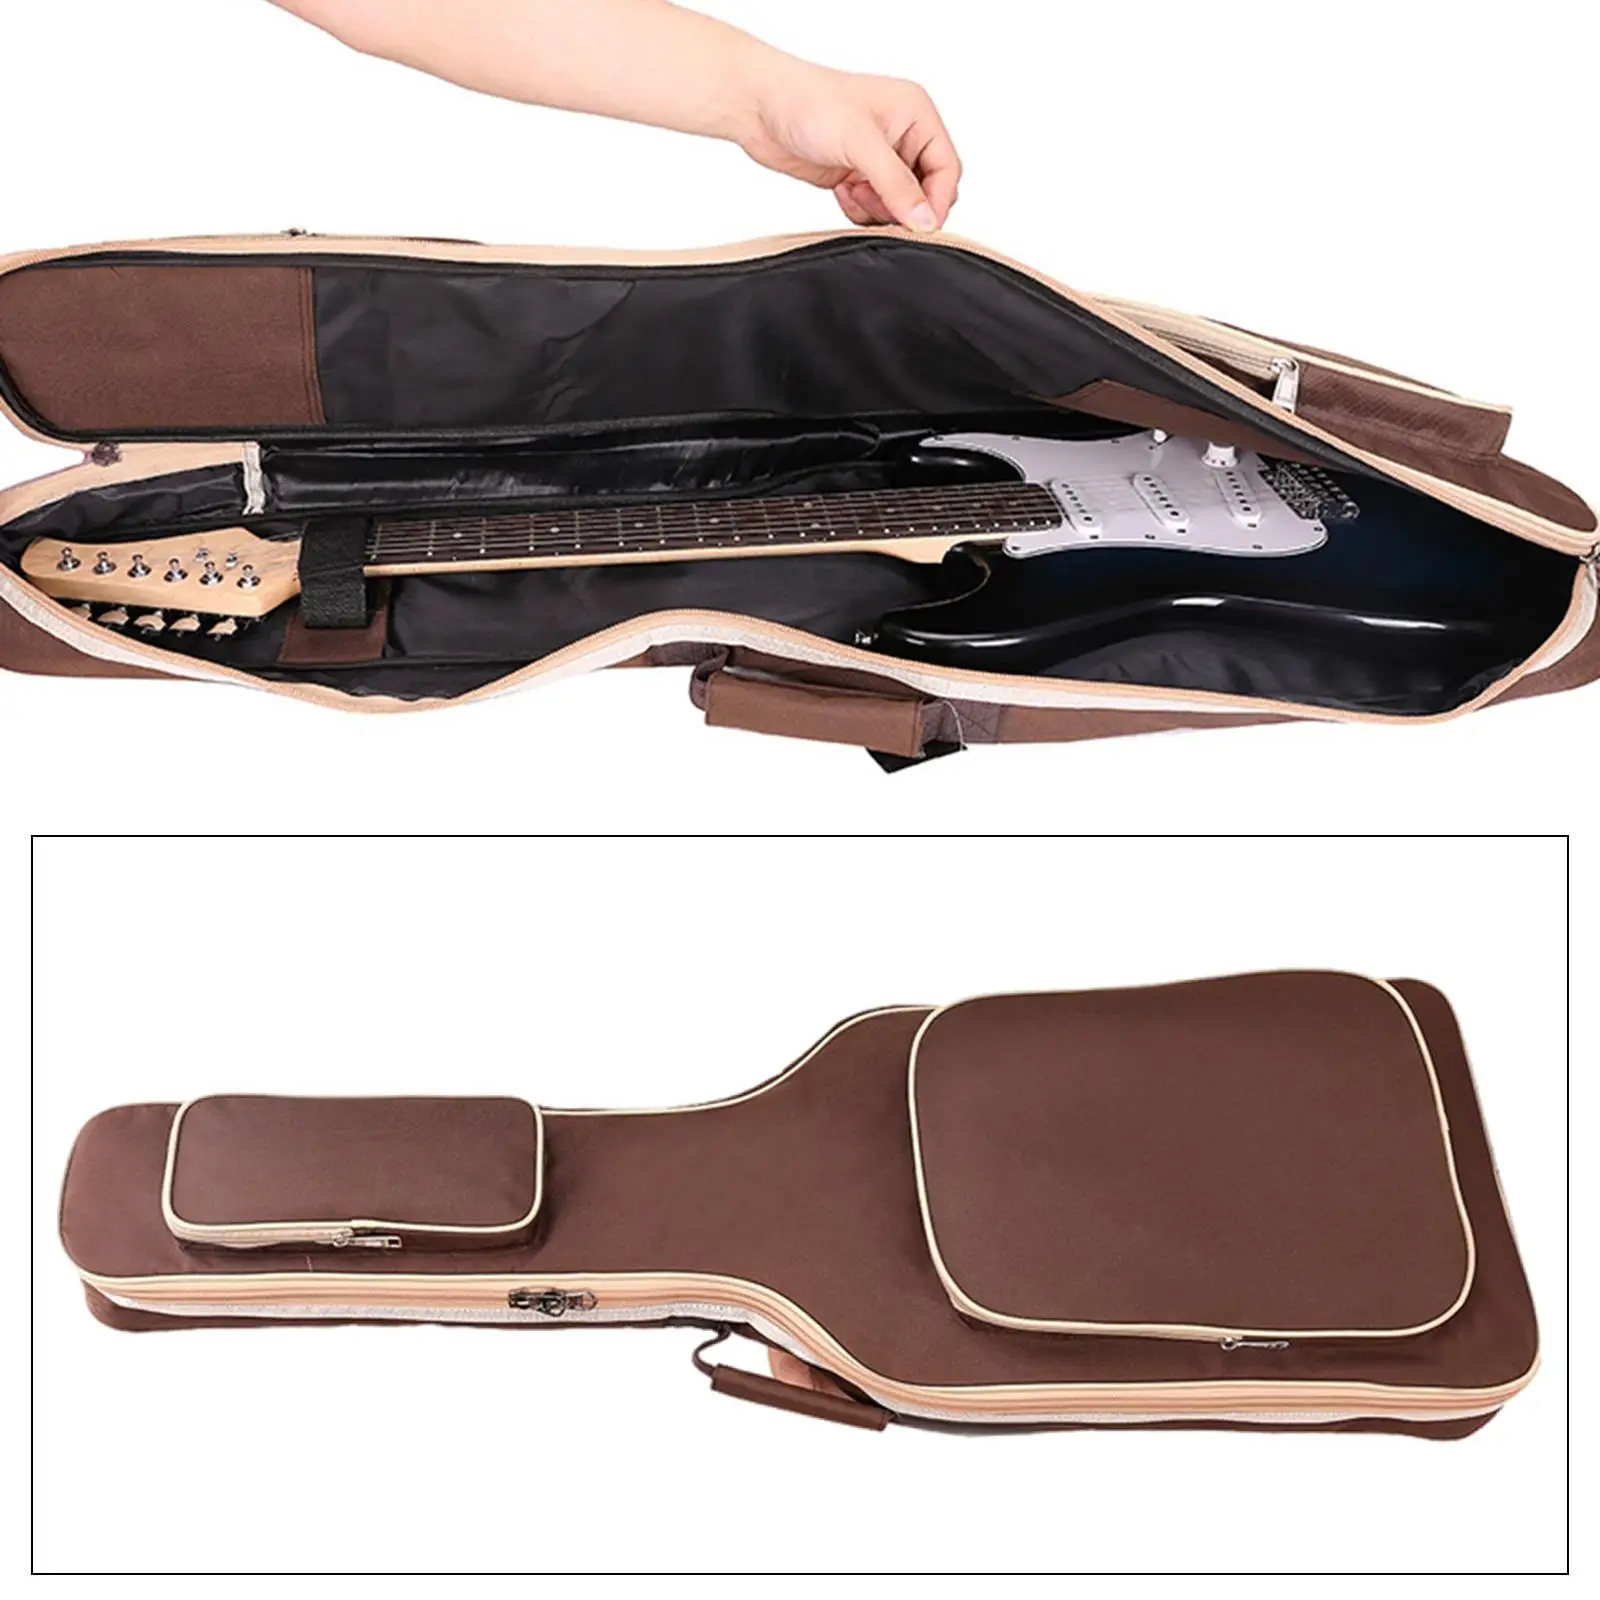 Electric Guitar Bag 7mm Cotton W/Carrying Handle Backpack for Concert Tour